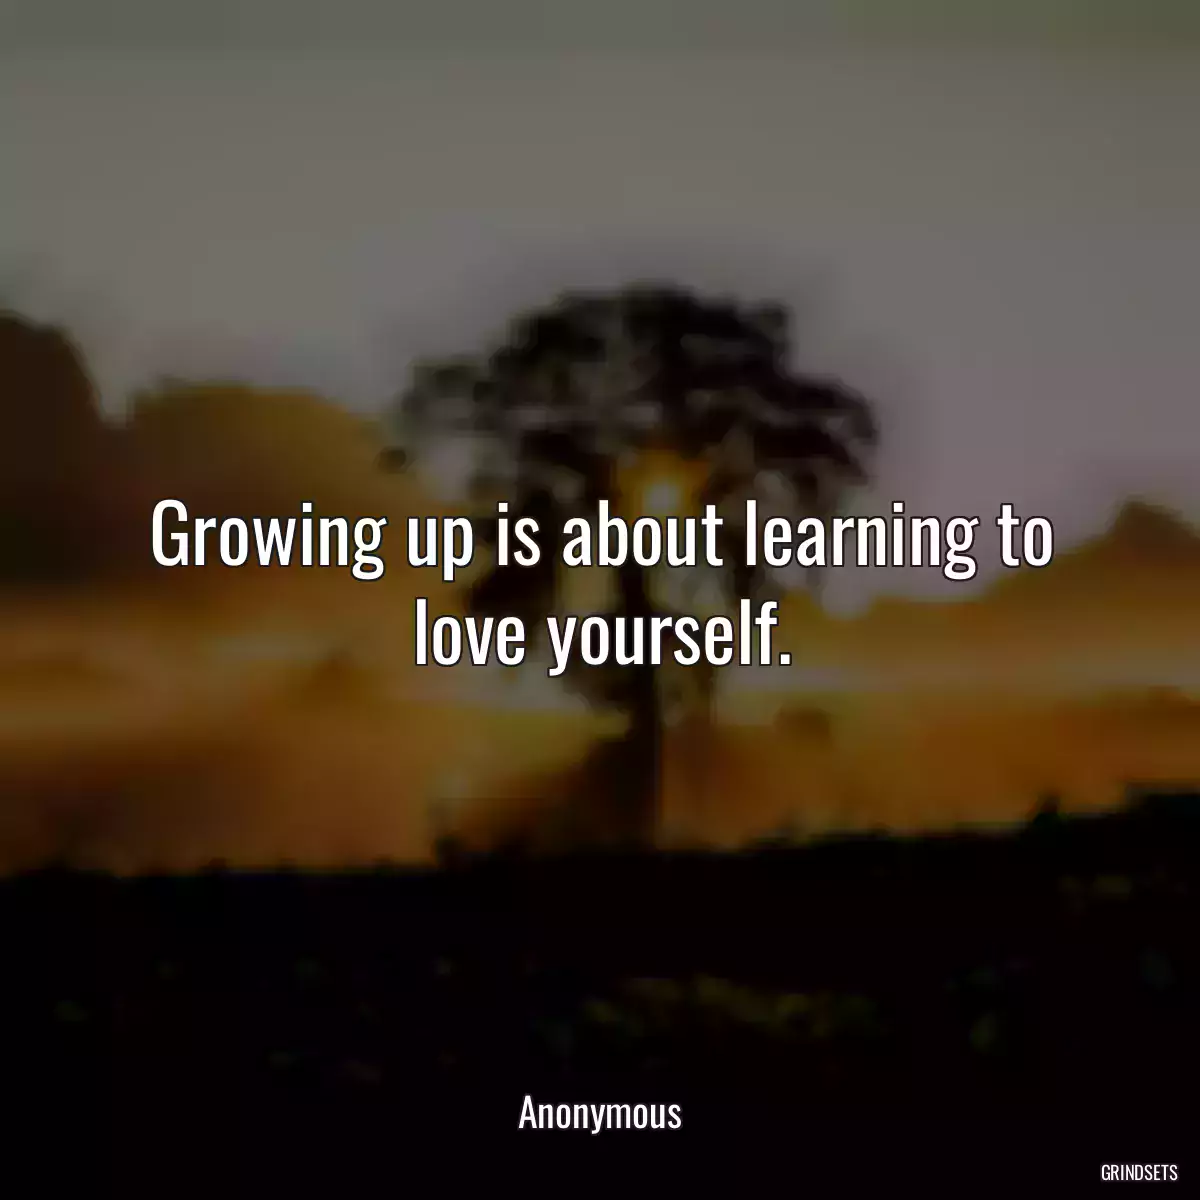 Growing up is about learning to love yourself.